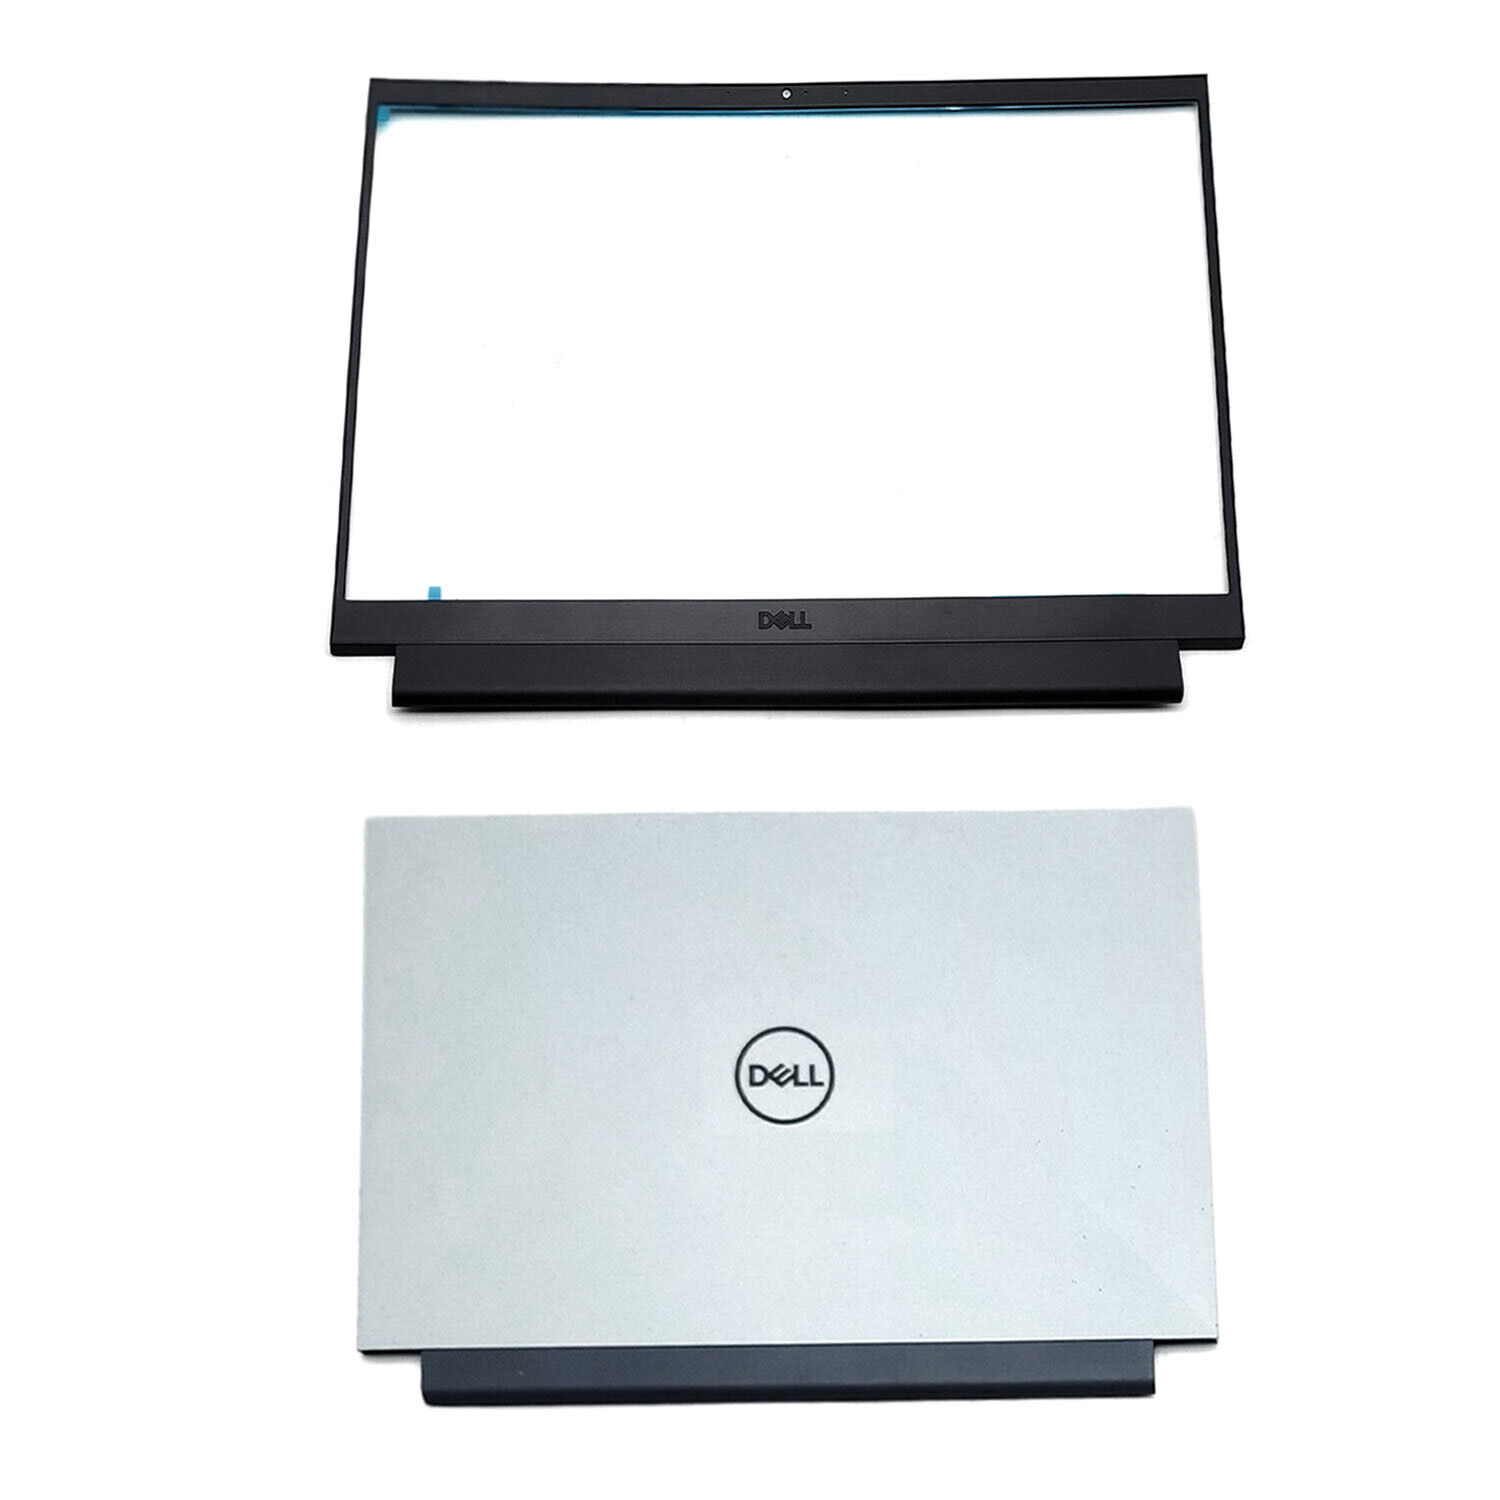 New For Dell G15 5510 5511 5515 LCD Rear Back Cover 0W9XD4 W9XD4 White+ Bezel US